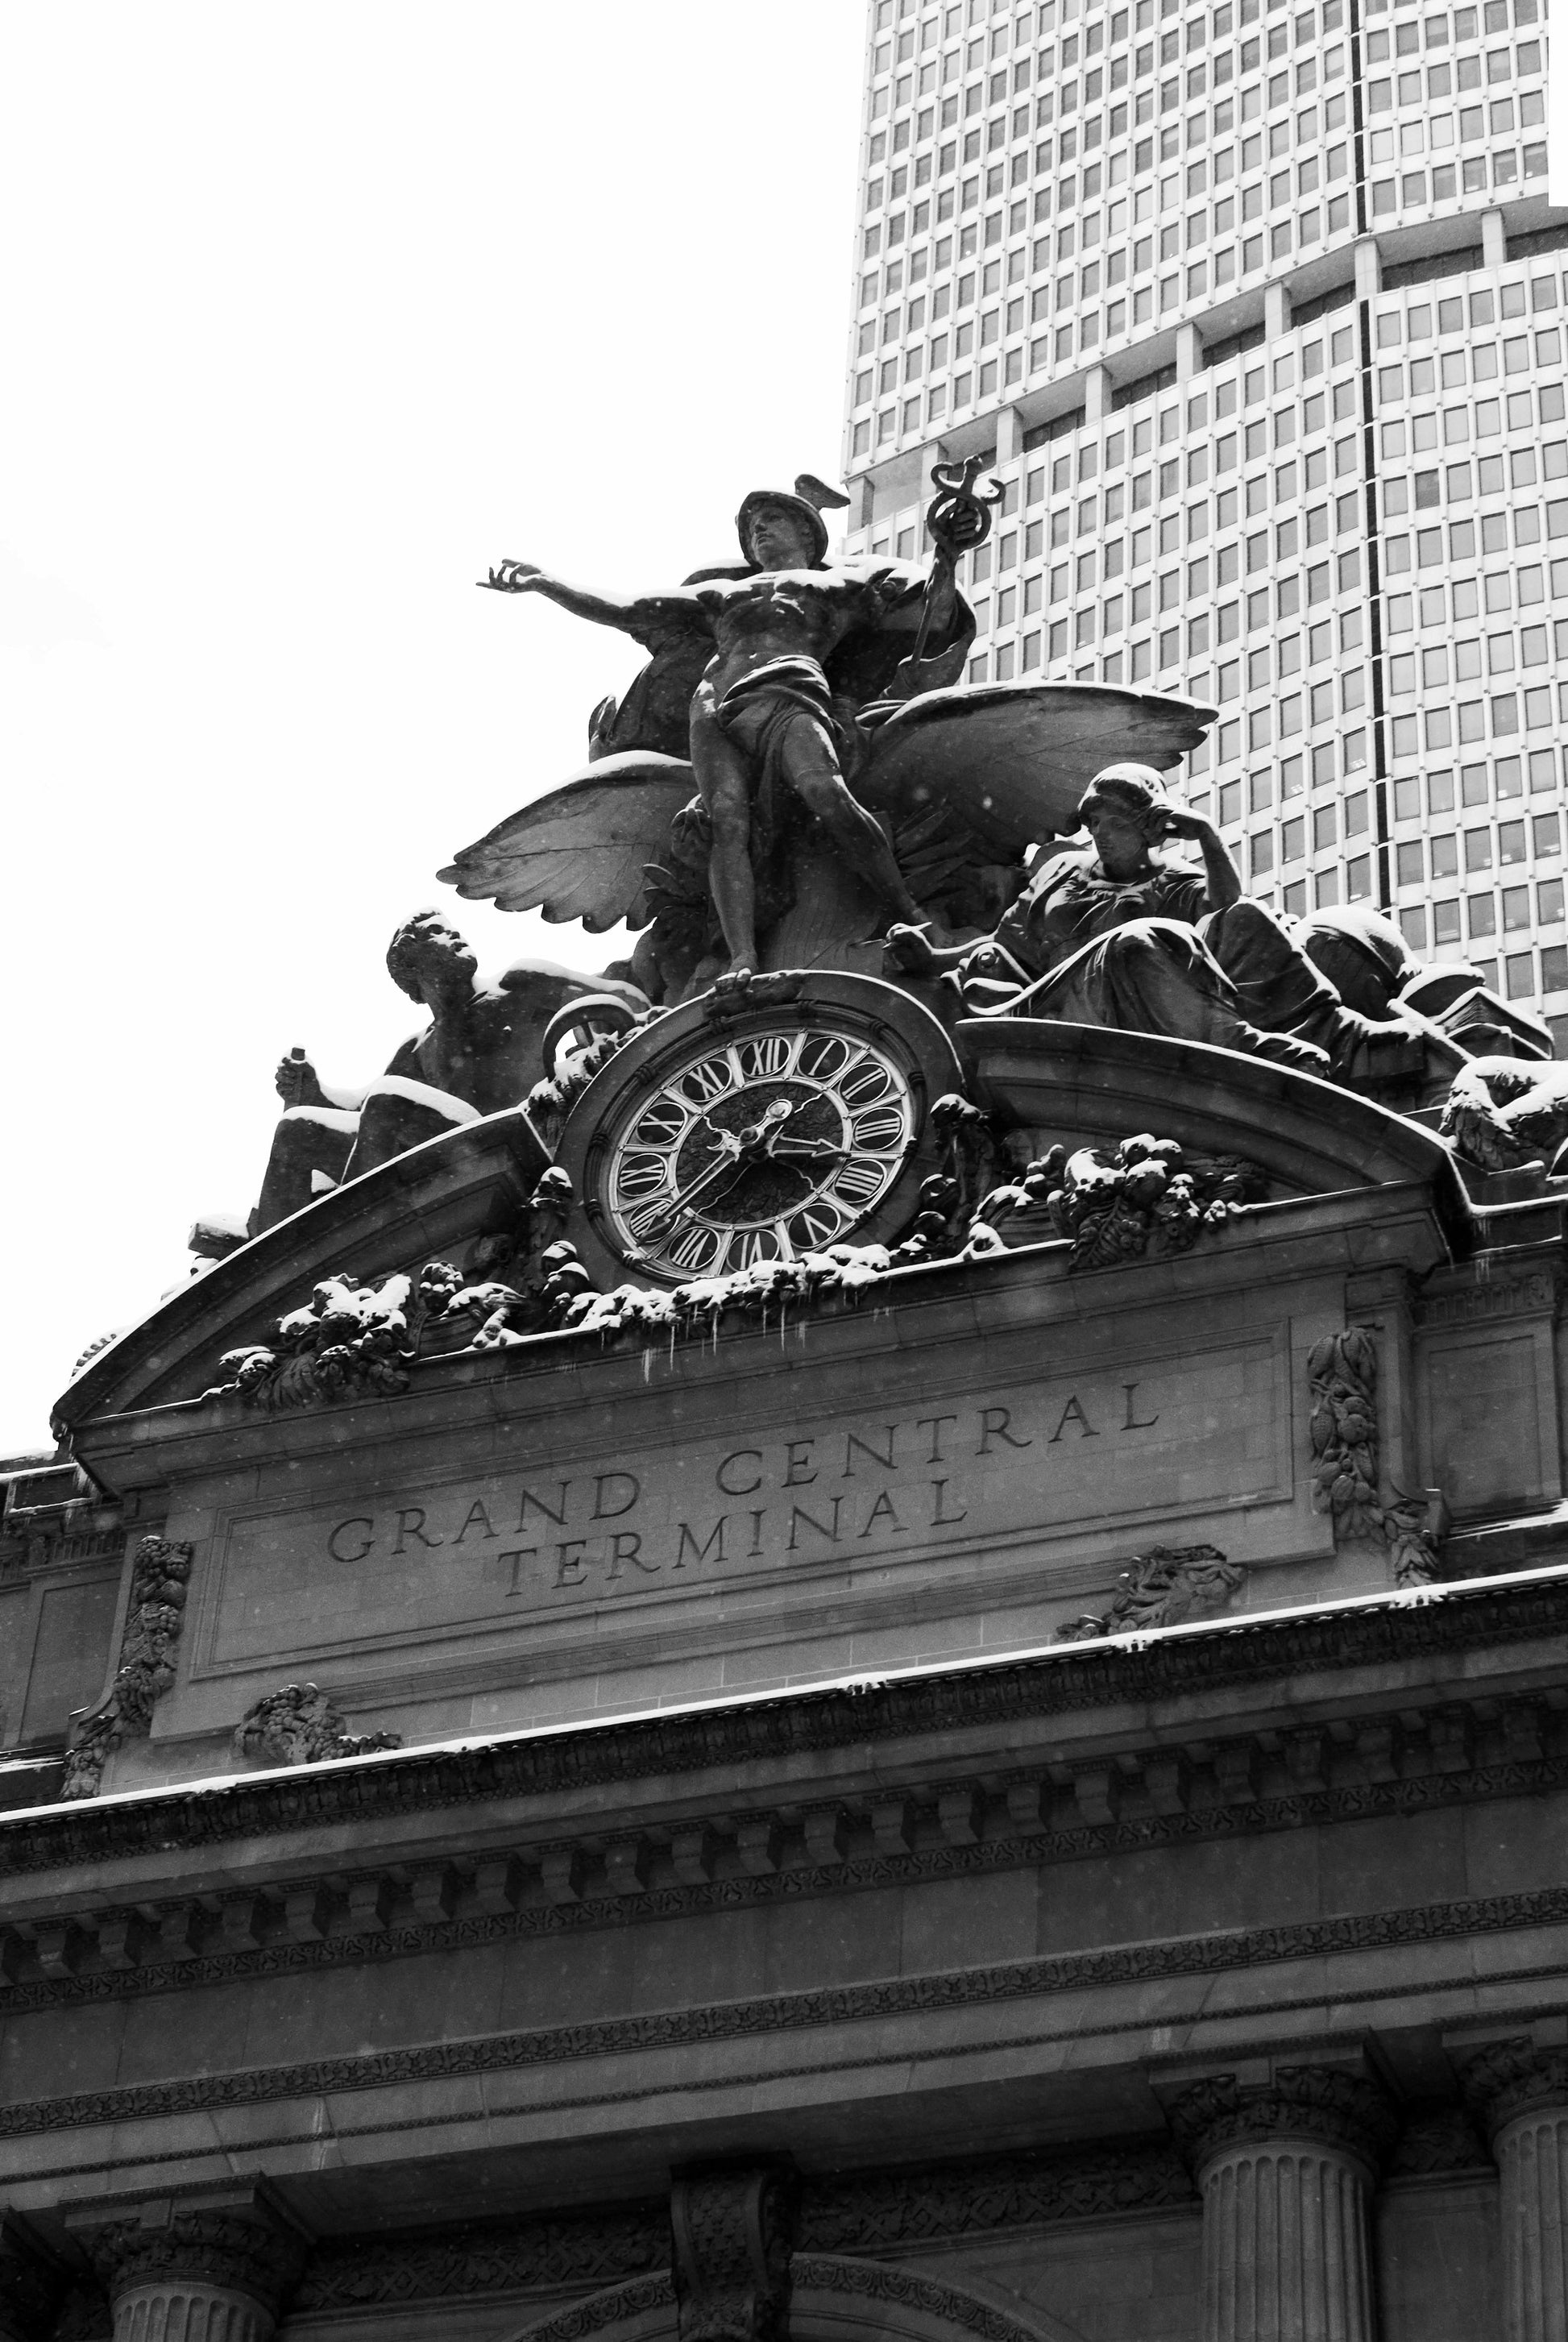 Alessandra Mattanza | BRAVERY, Grand Central Station, New York. Hercules, Minerva and Mercury, the god of travel, adorn the 42nd St entrance to Grand Central Station. Available as a photographic print on acrylic glass.